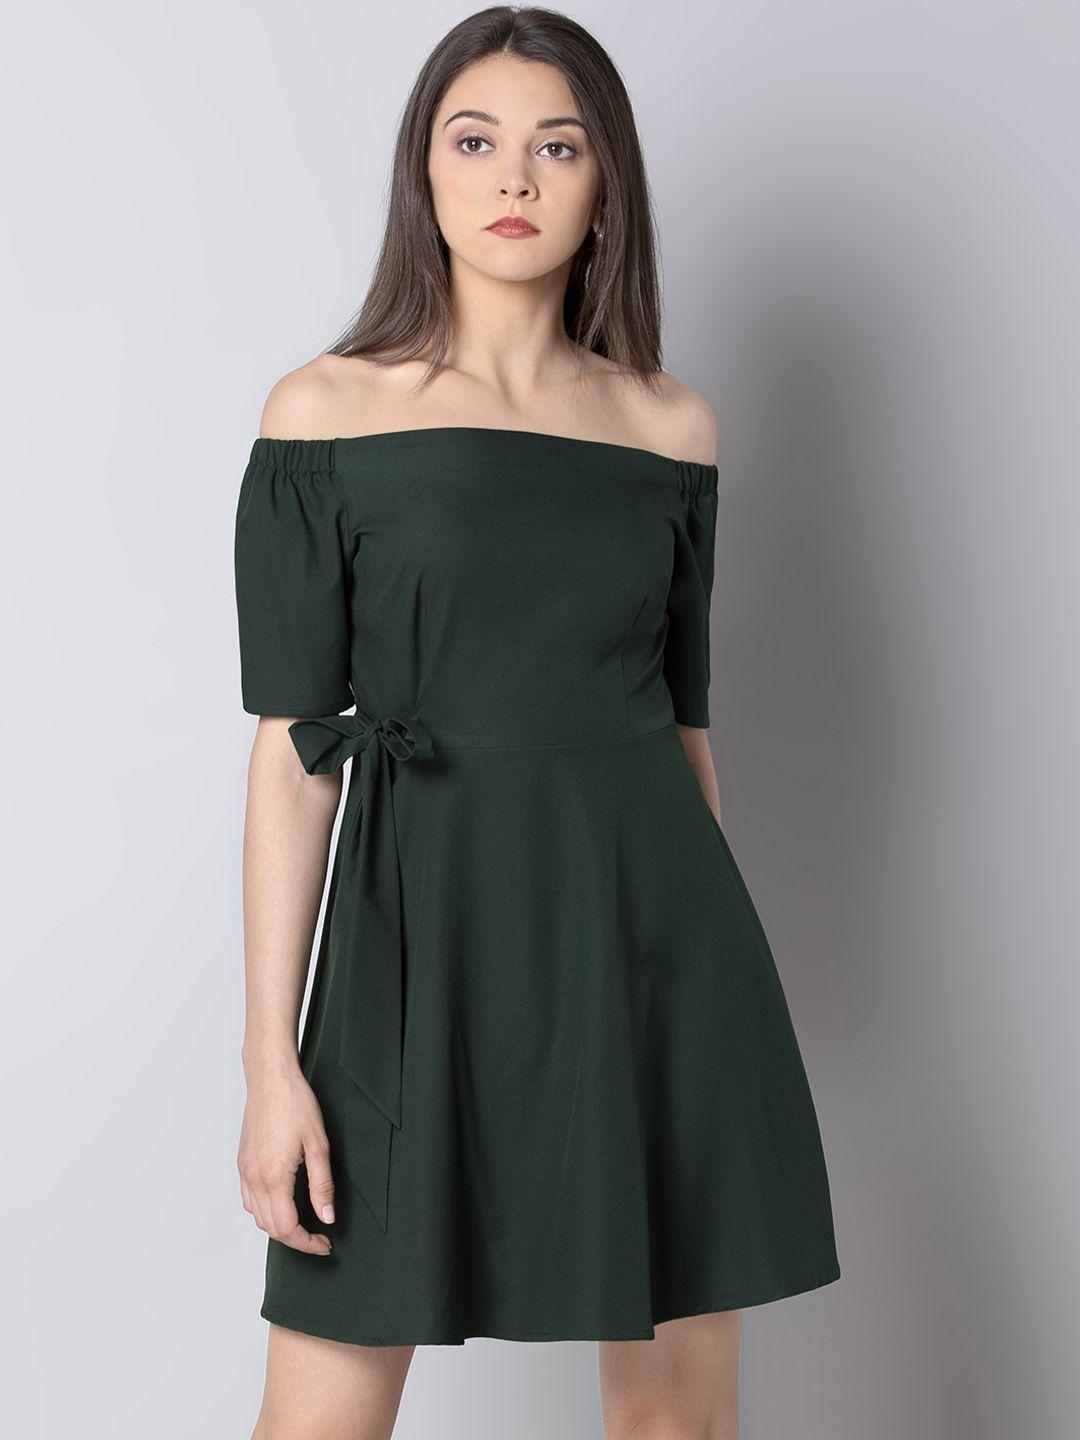 faballey-women-green-fit-and-flare-dress